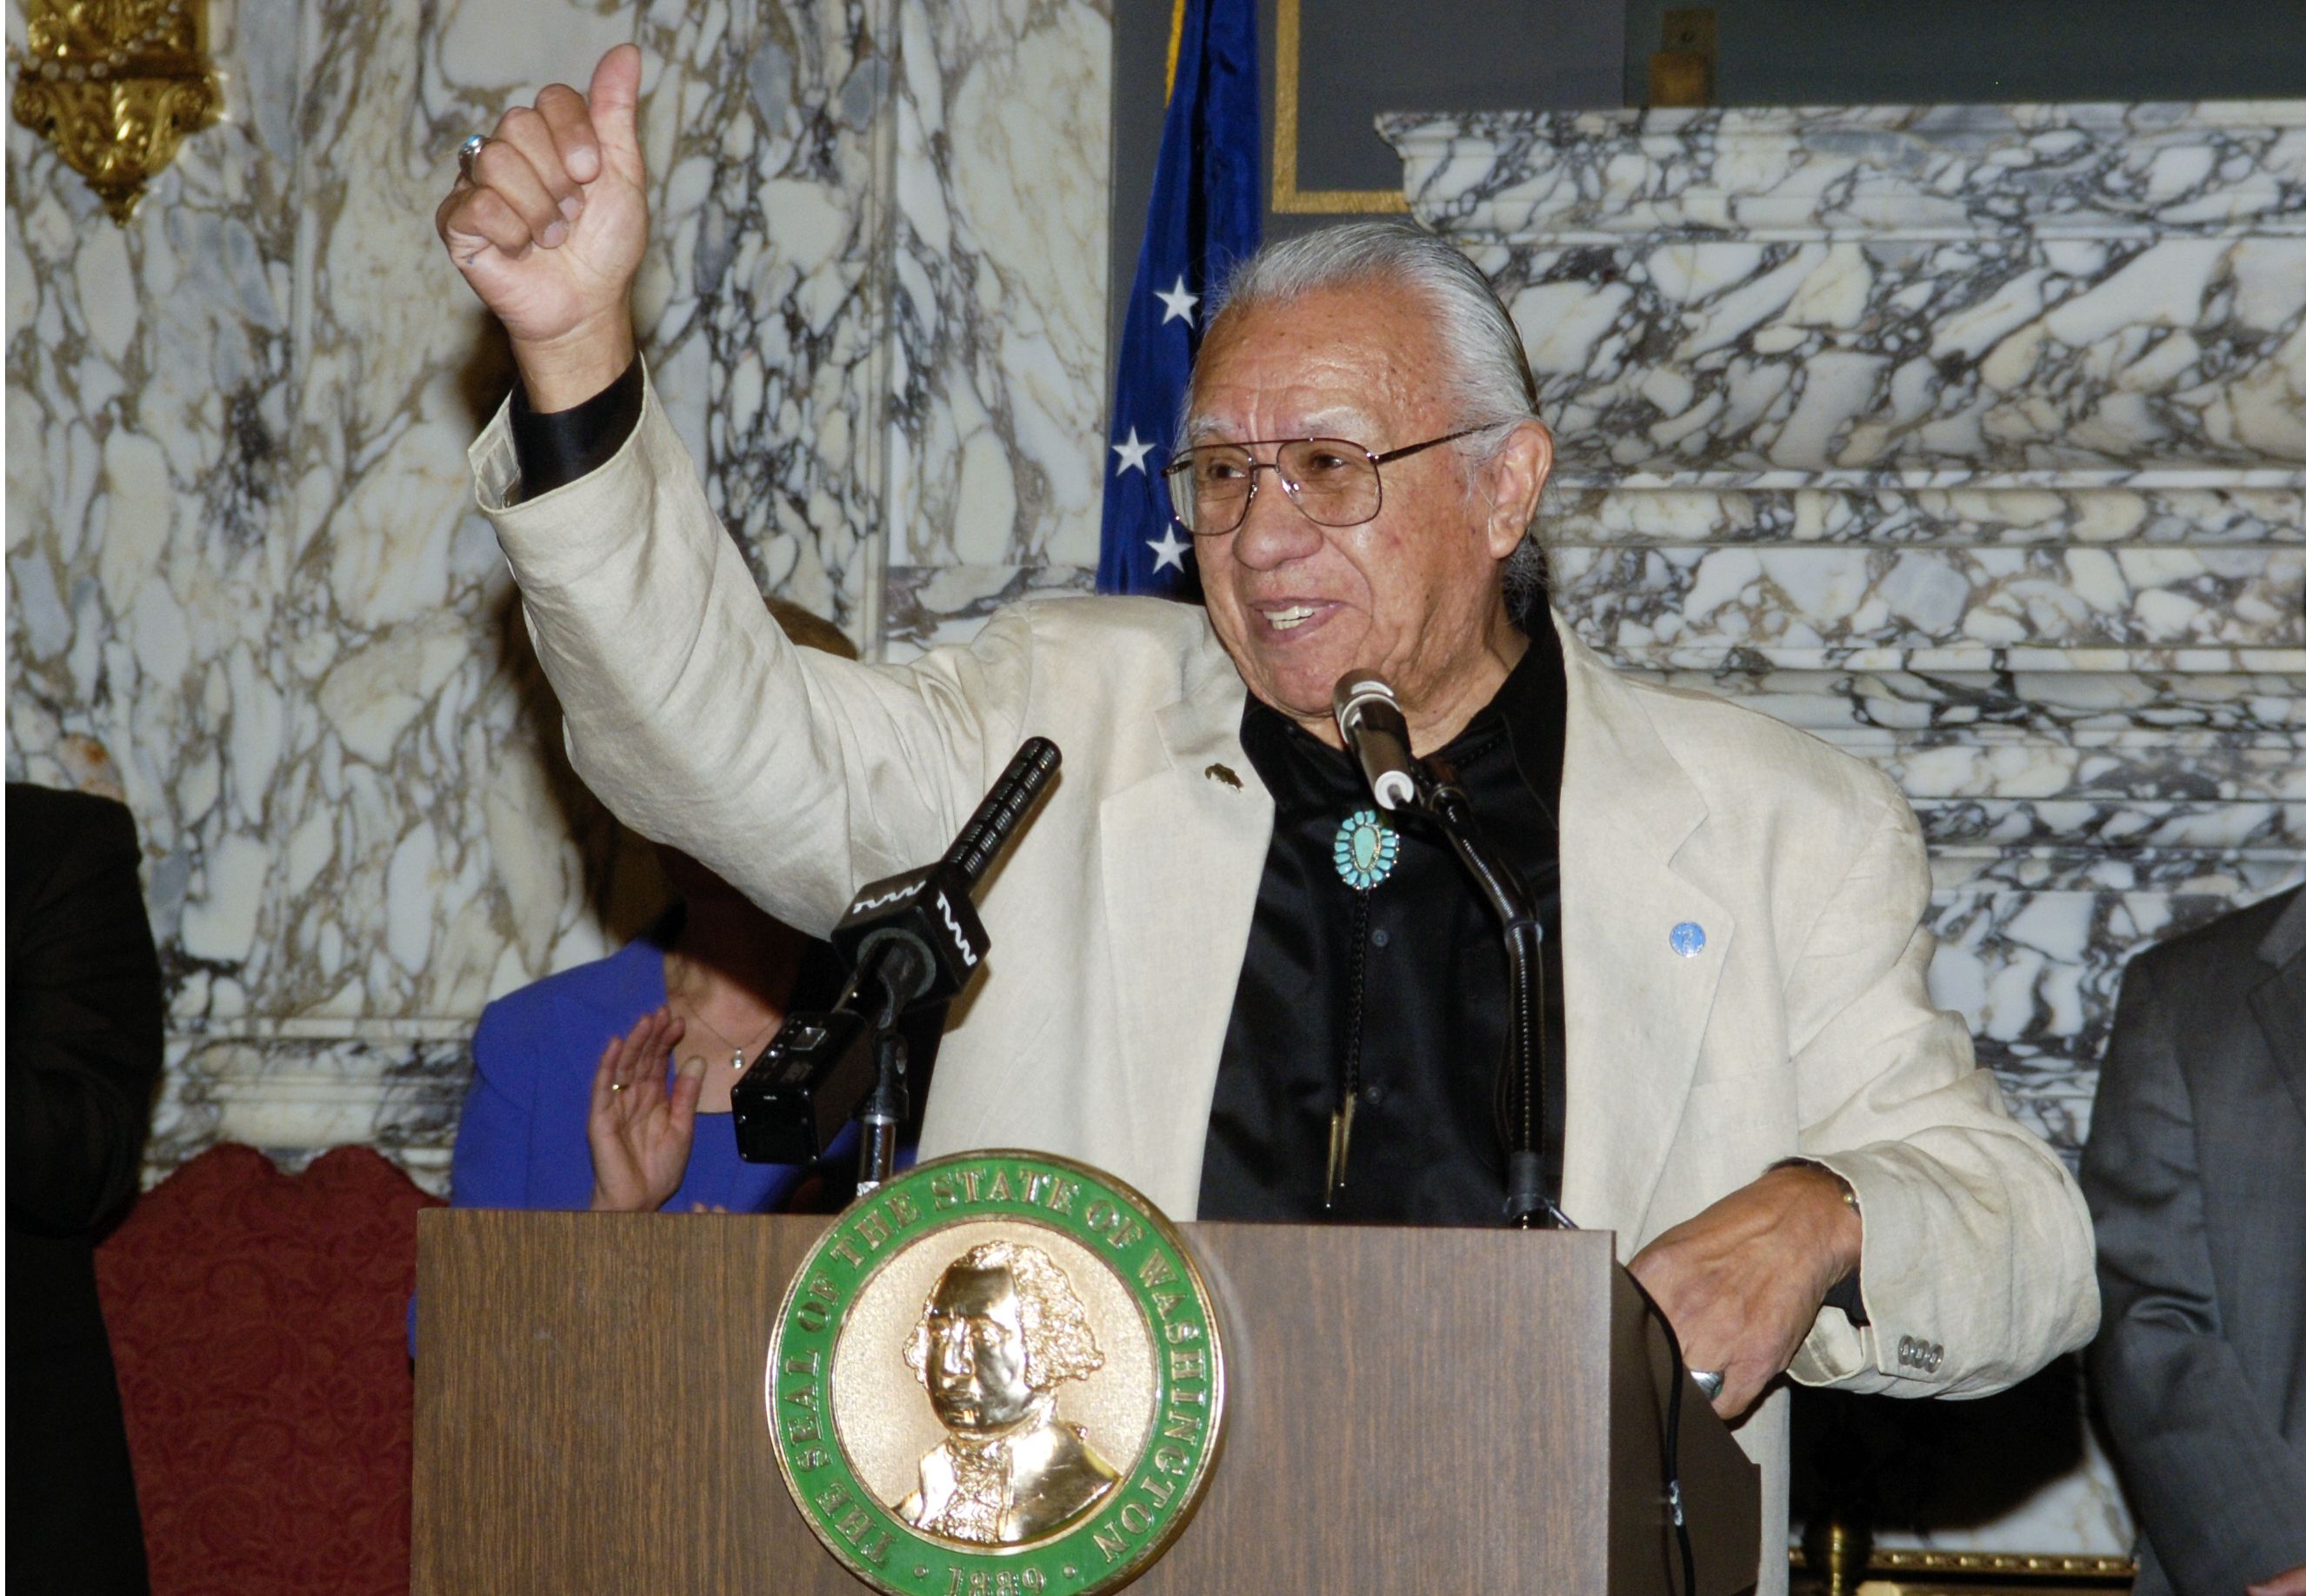 Billy Frank Jr. stands at a podium with the state of Washington seal at the state Capitol, with his right hand raised.